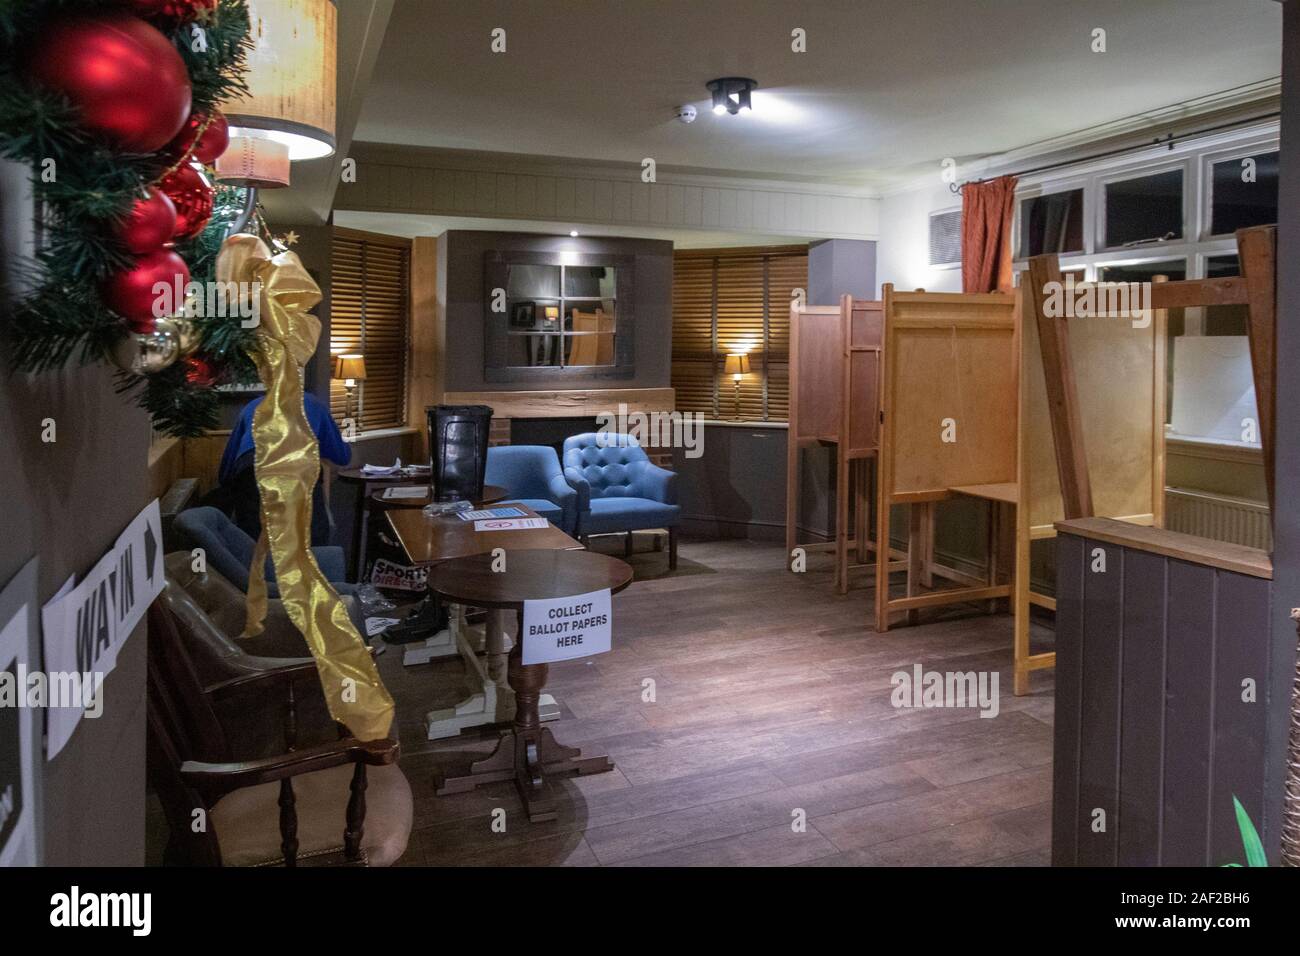 Wombourne, UK. 12th Dec 2019. Early opening for the Wagon and Horses pub on a wet morning in Wombourne as it is in use as a South Staffordshire constituency polling station in the 2019 General Election. This is a new polling station location for local residents compared to previous local and general elections. Credit: Paul Bunch/Alamy Live News. Stock Photo